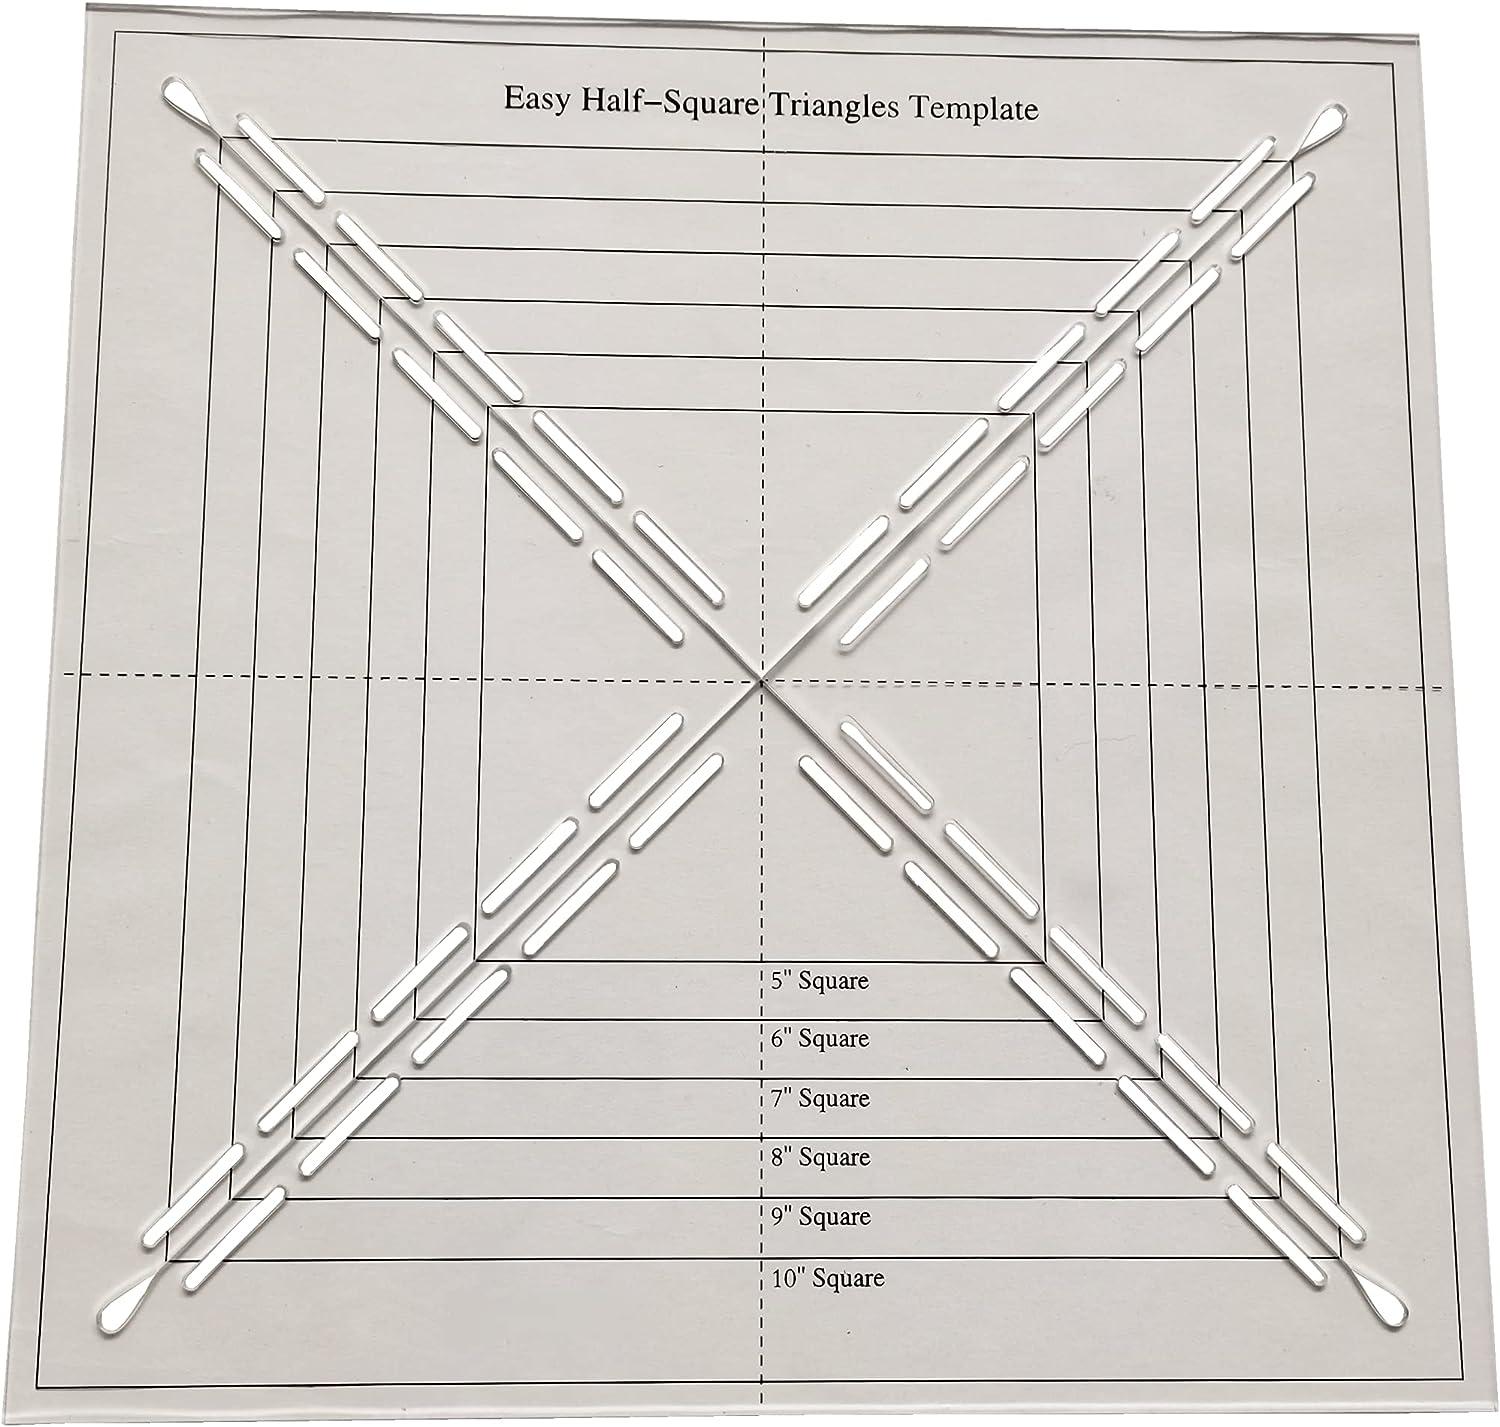 JKOS ∣ Triangle Ruler ∣ 29cm Etched Scale ∣ Patternmaking